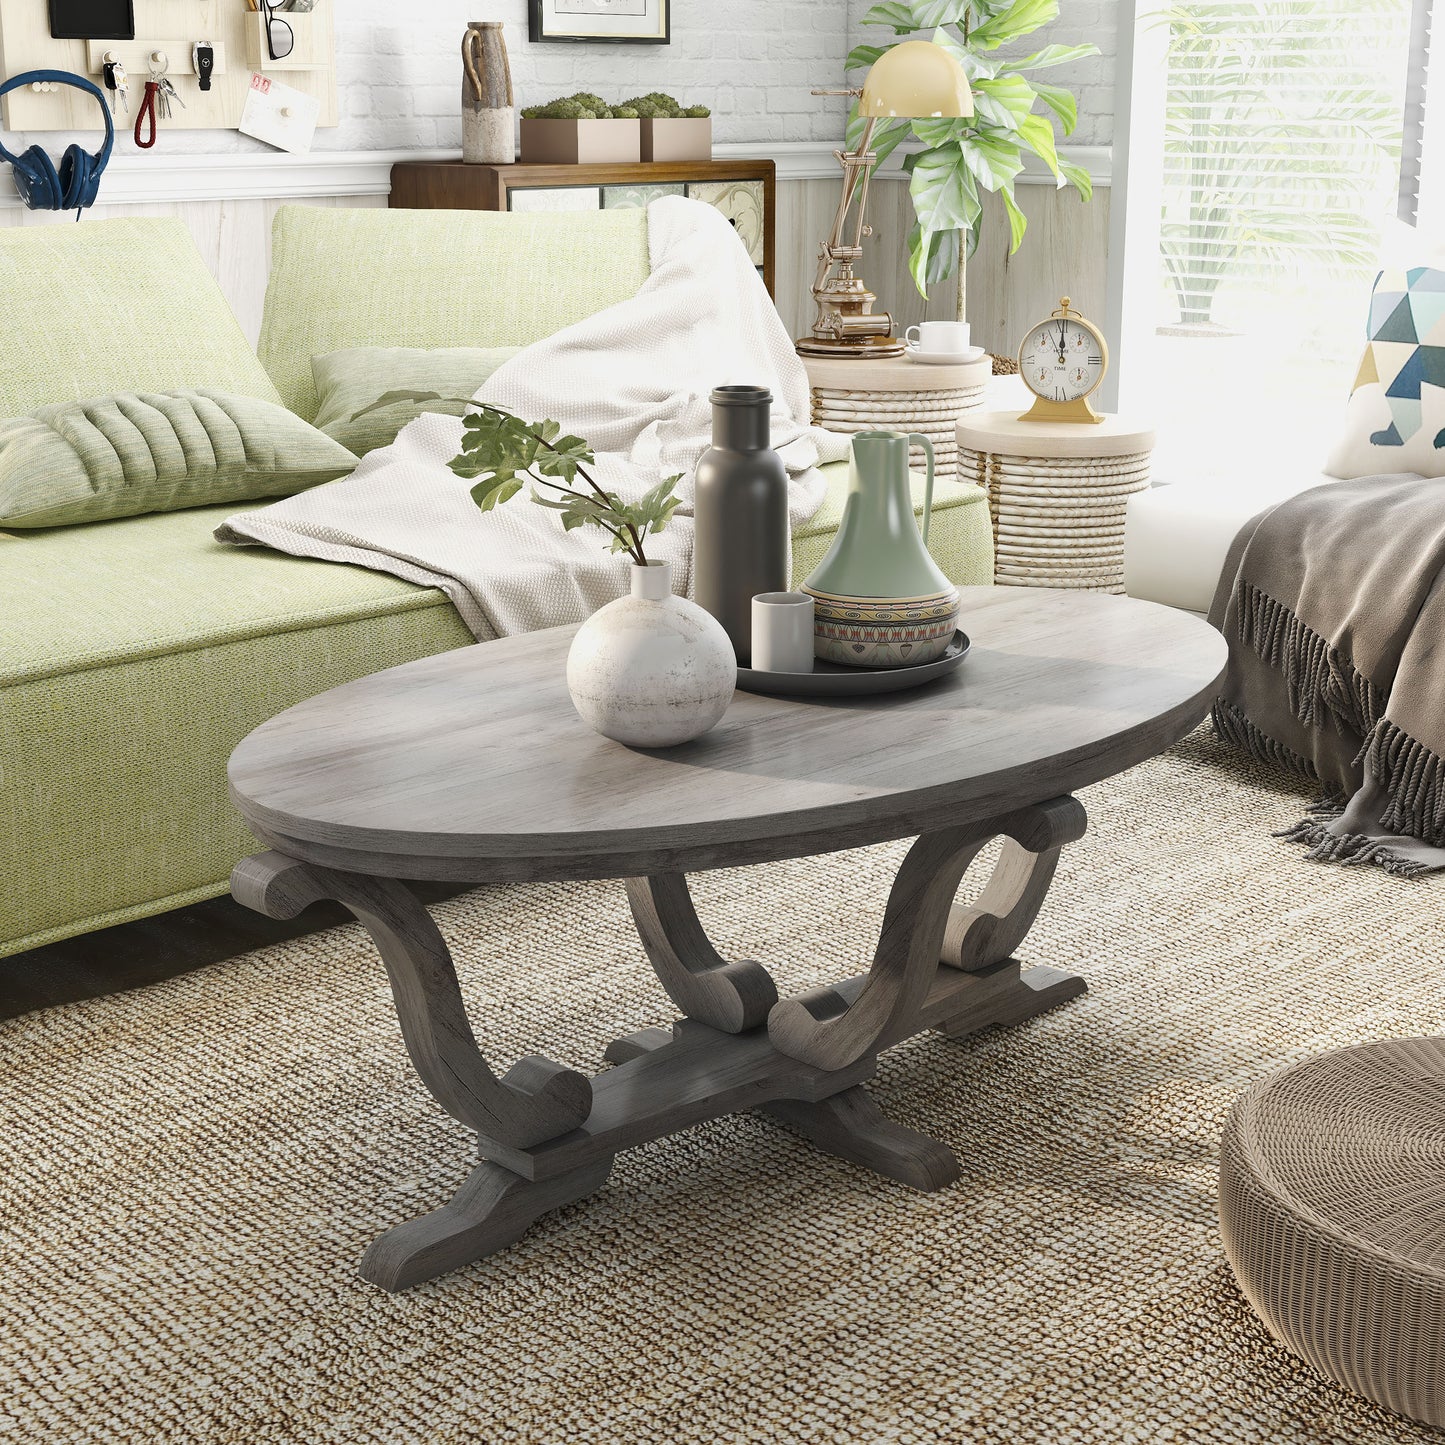 Right angled farmhouse vintage gray oak curved pedestal coffee table in a living room with accessories